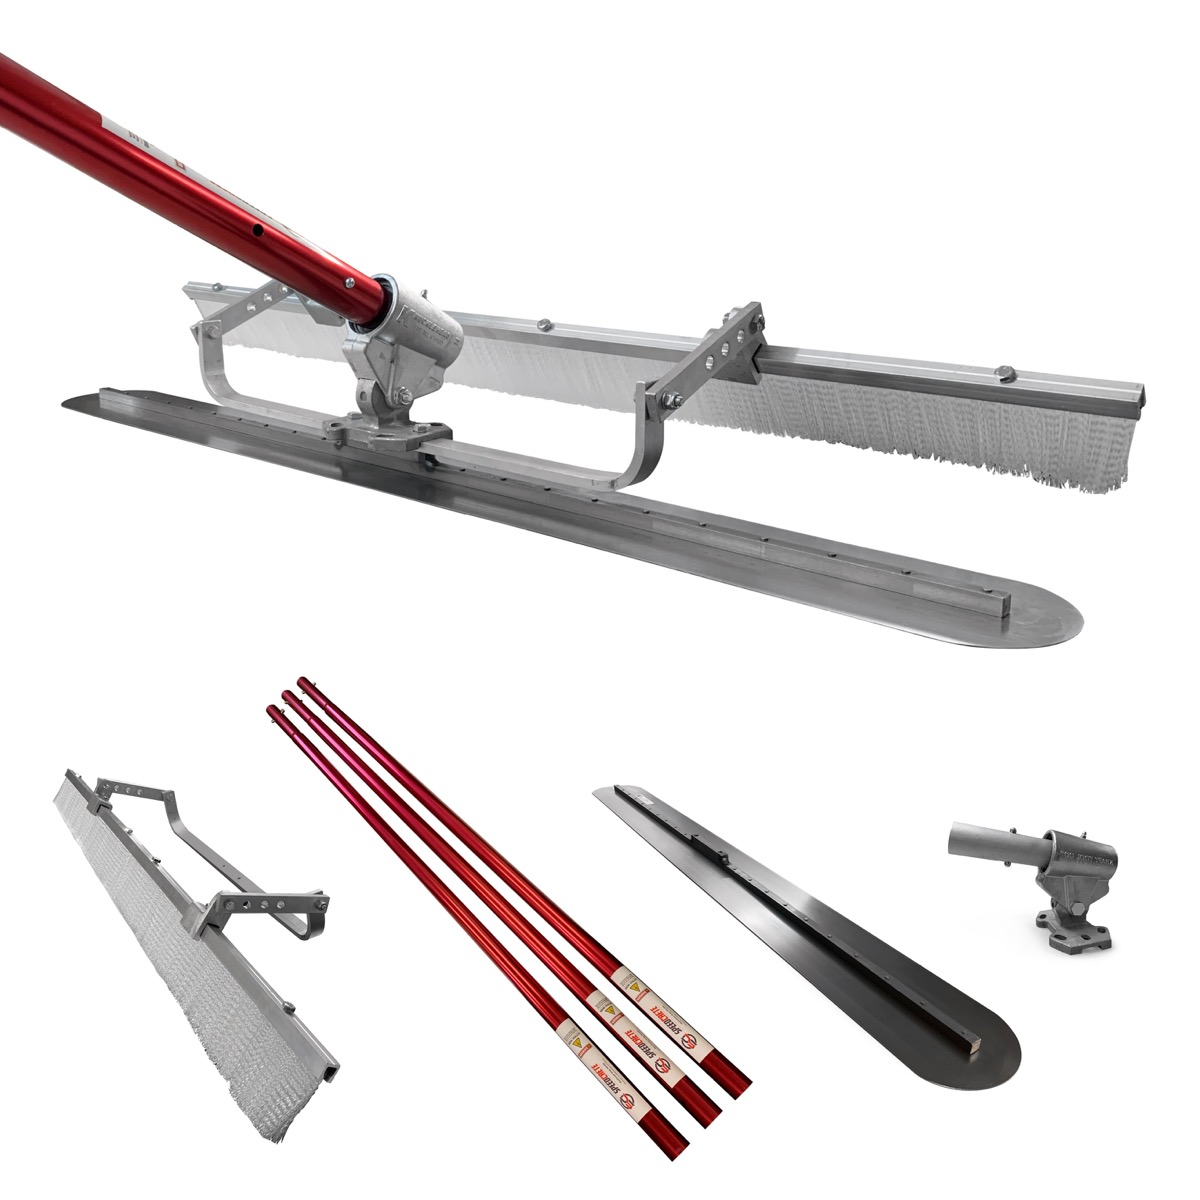 This Fresno float comes with a choice of broom strength which is attached via a bracket. The tilt-action gear box attaches to snap handles to allow reach on the concrete slab. This brushed finish concrete is popular and the kit can be bought from Speedcre